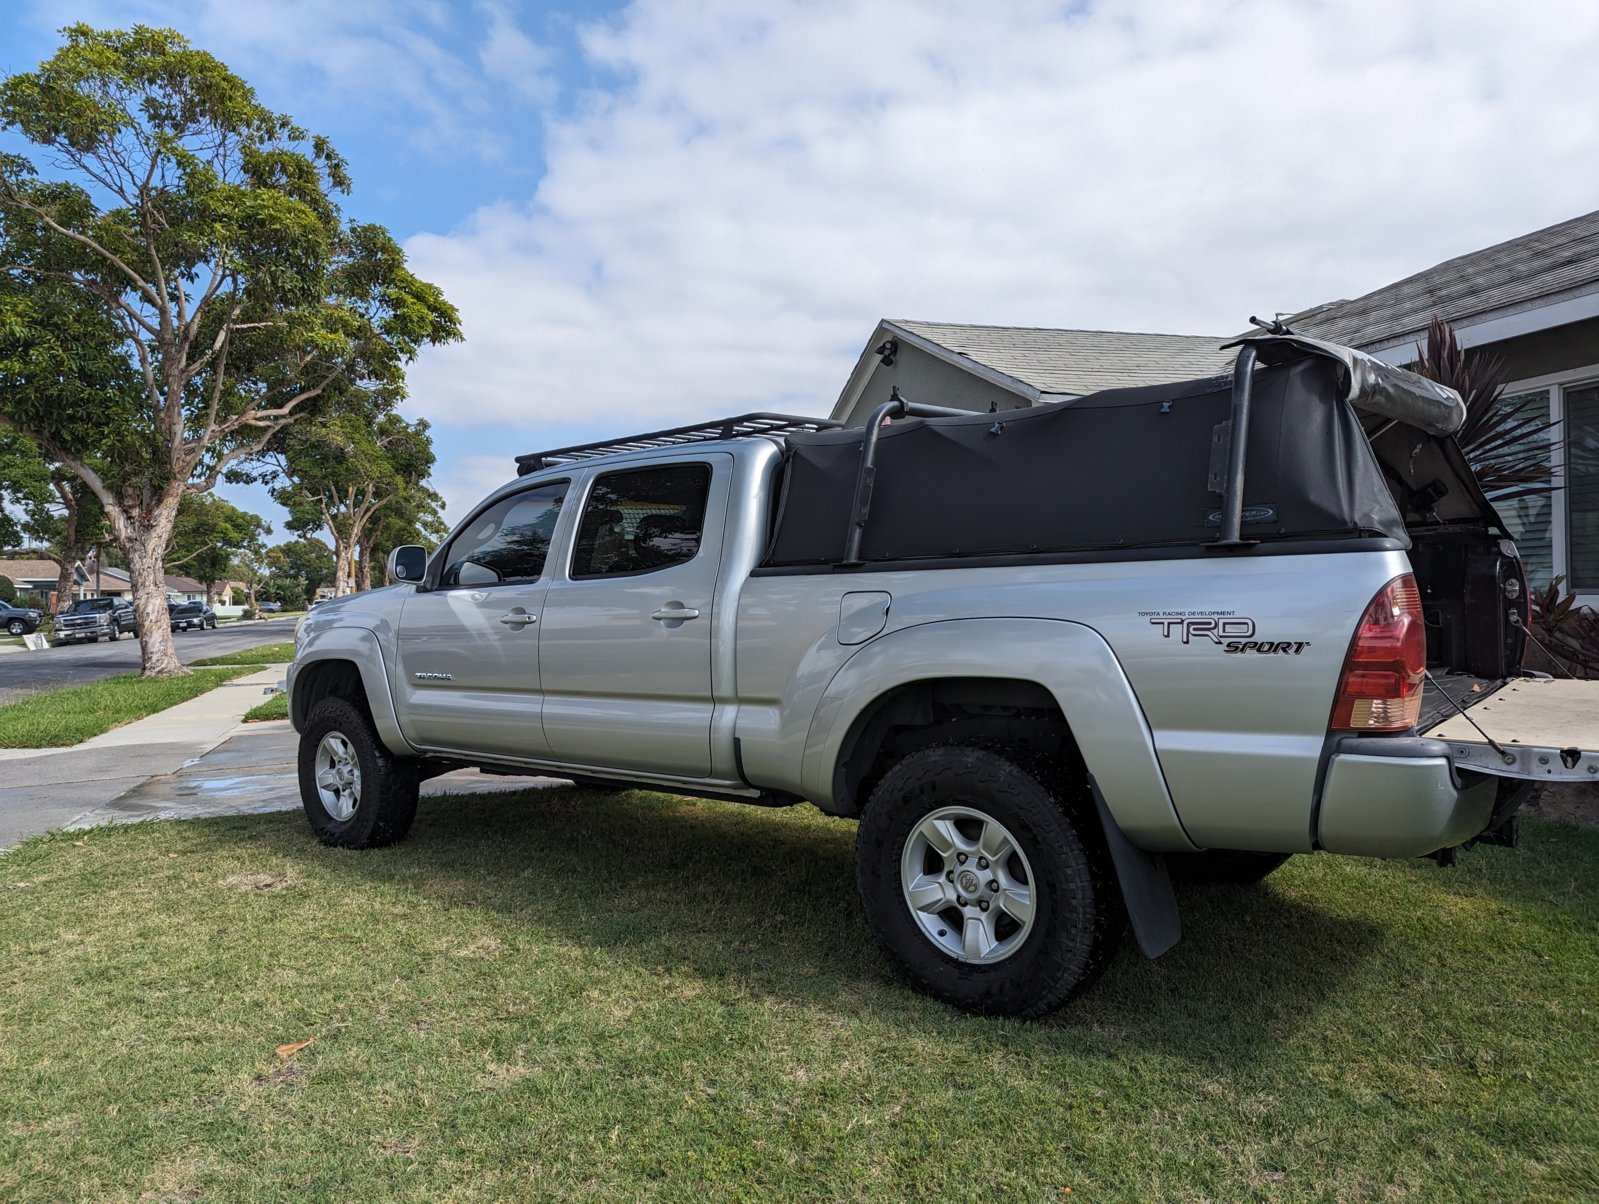 BULLY TR-02WK Tailgate Net for Compact Truck